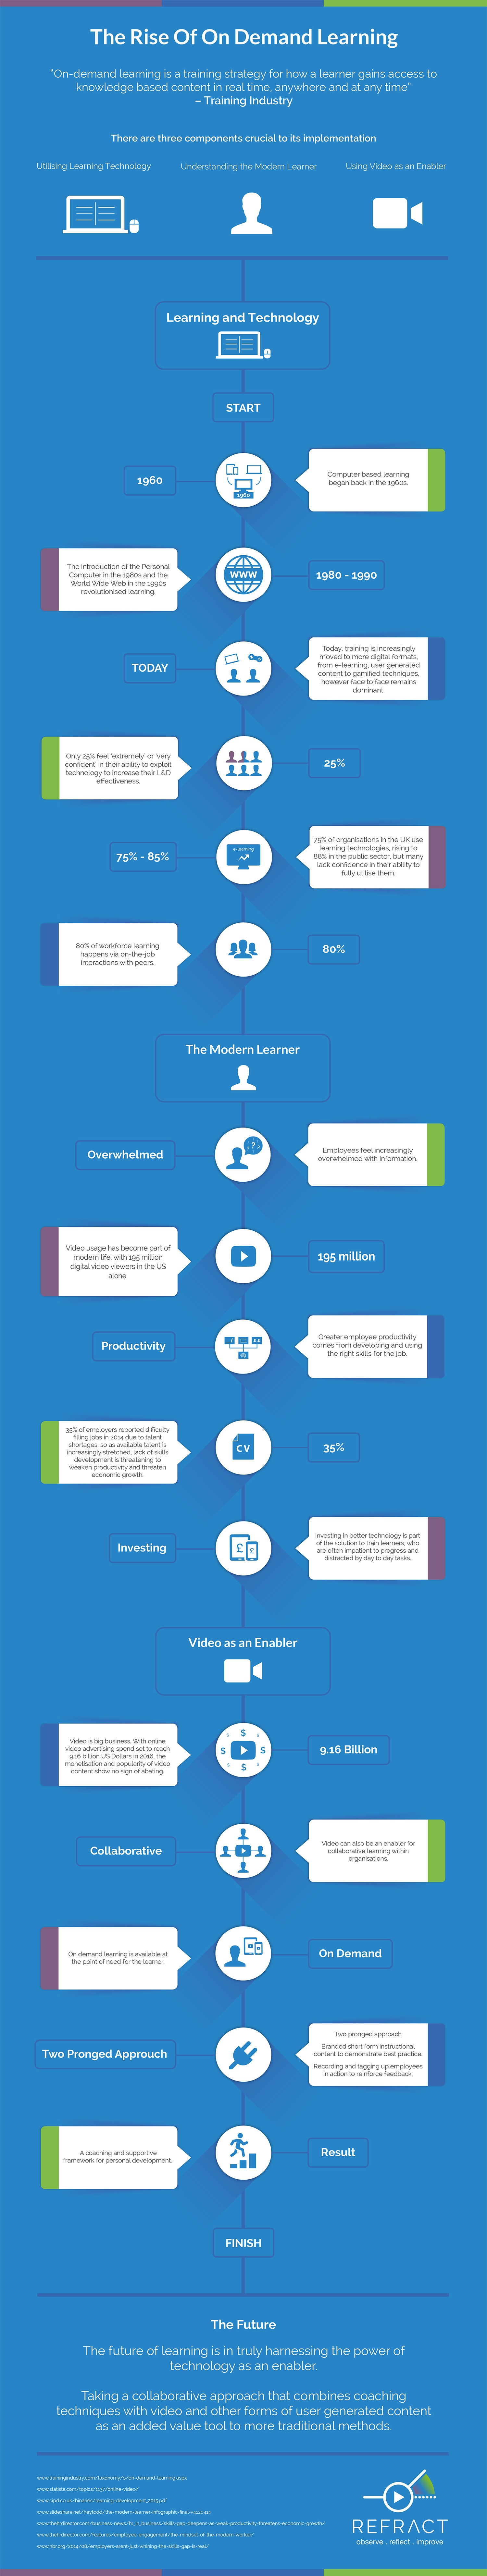 The Rise Of On Demand Learning Infographic